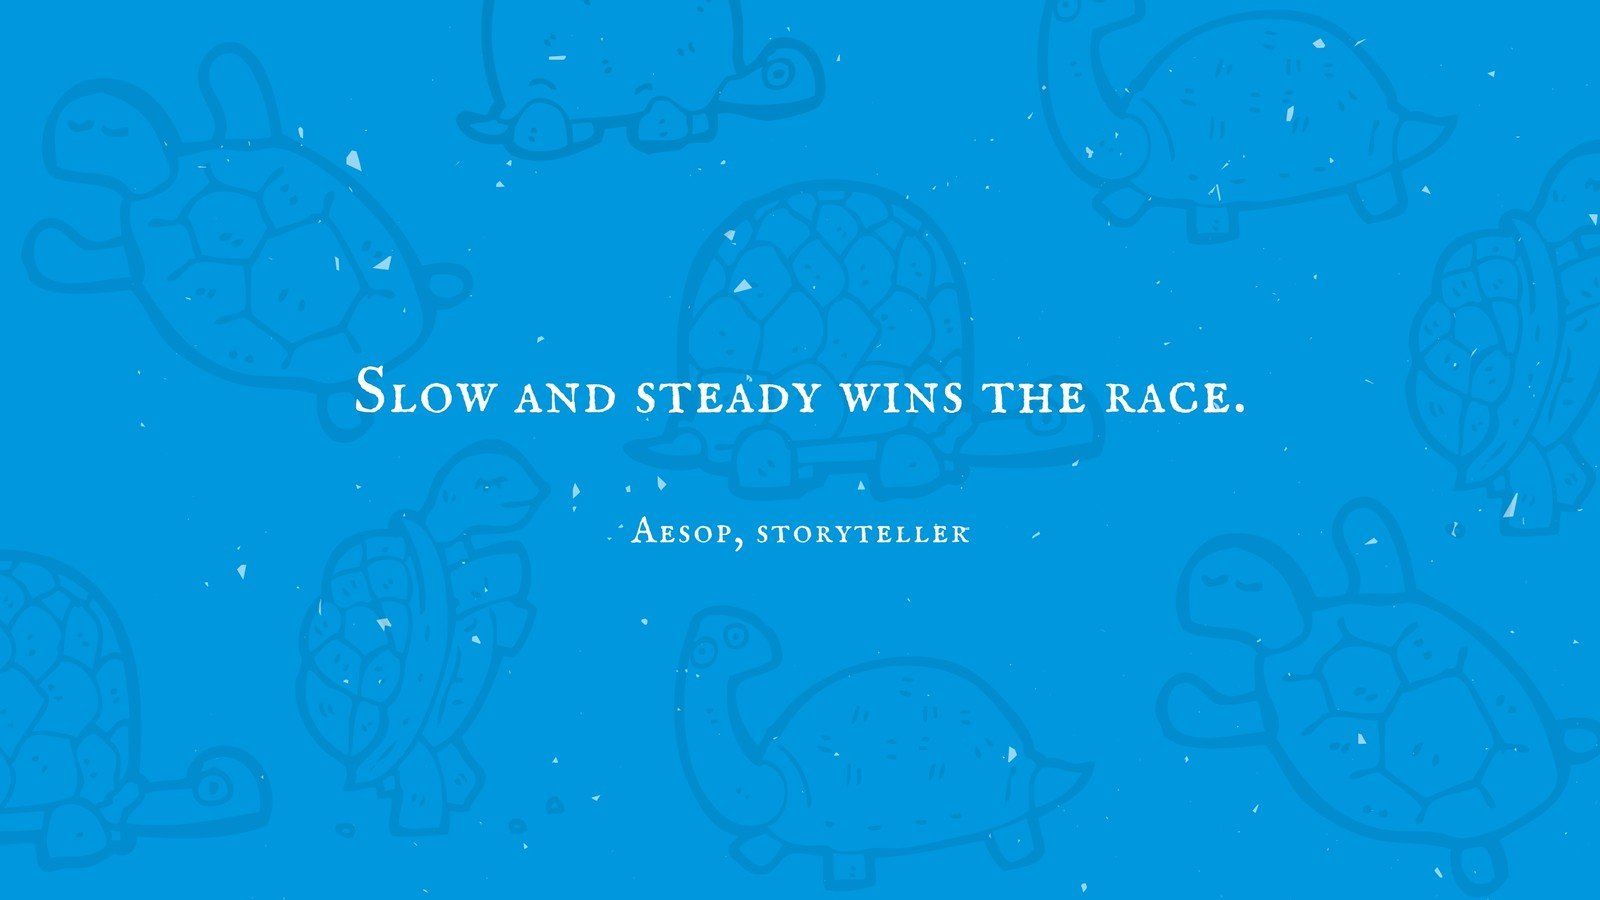 A blue background with turtle illustrations and the quote 